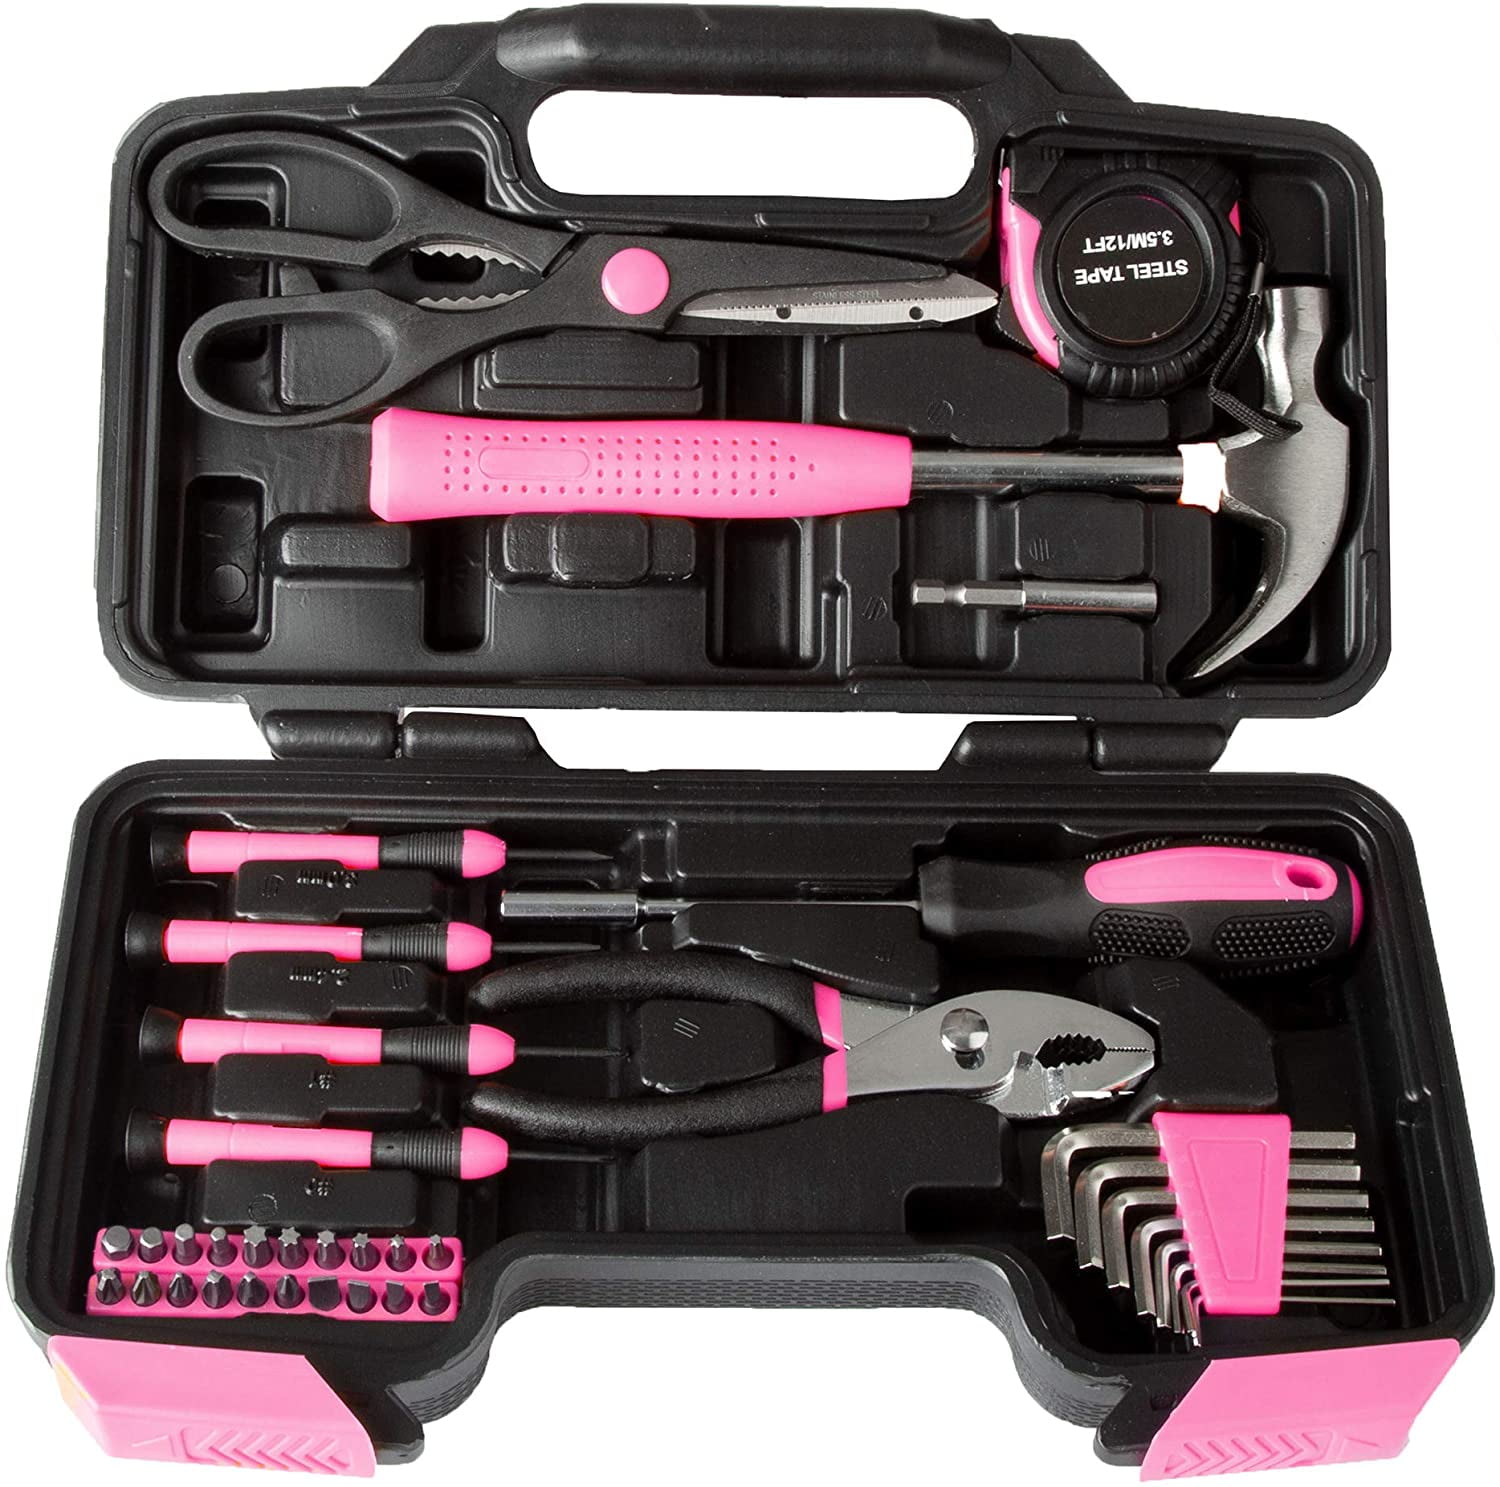 Essentials 21043 32-Piece Around the House Tool Kit, Tool Kit for Home,  College Apartment Essentials, House Essentials, Pink Tool Kit